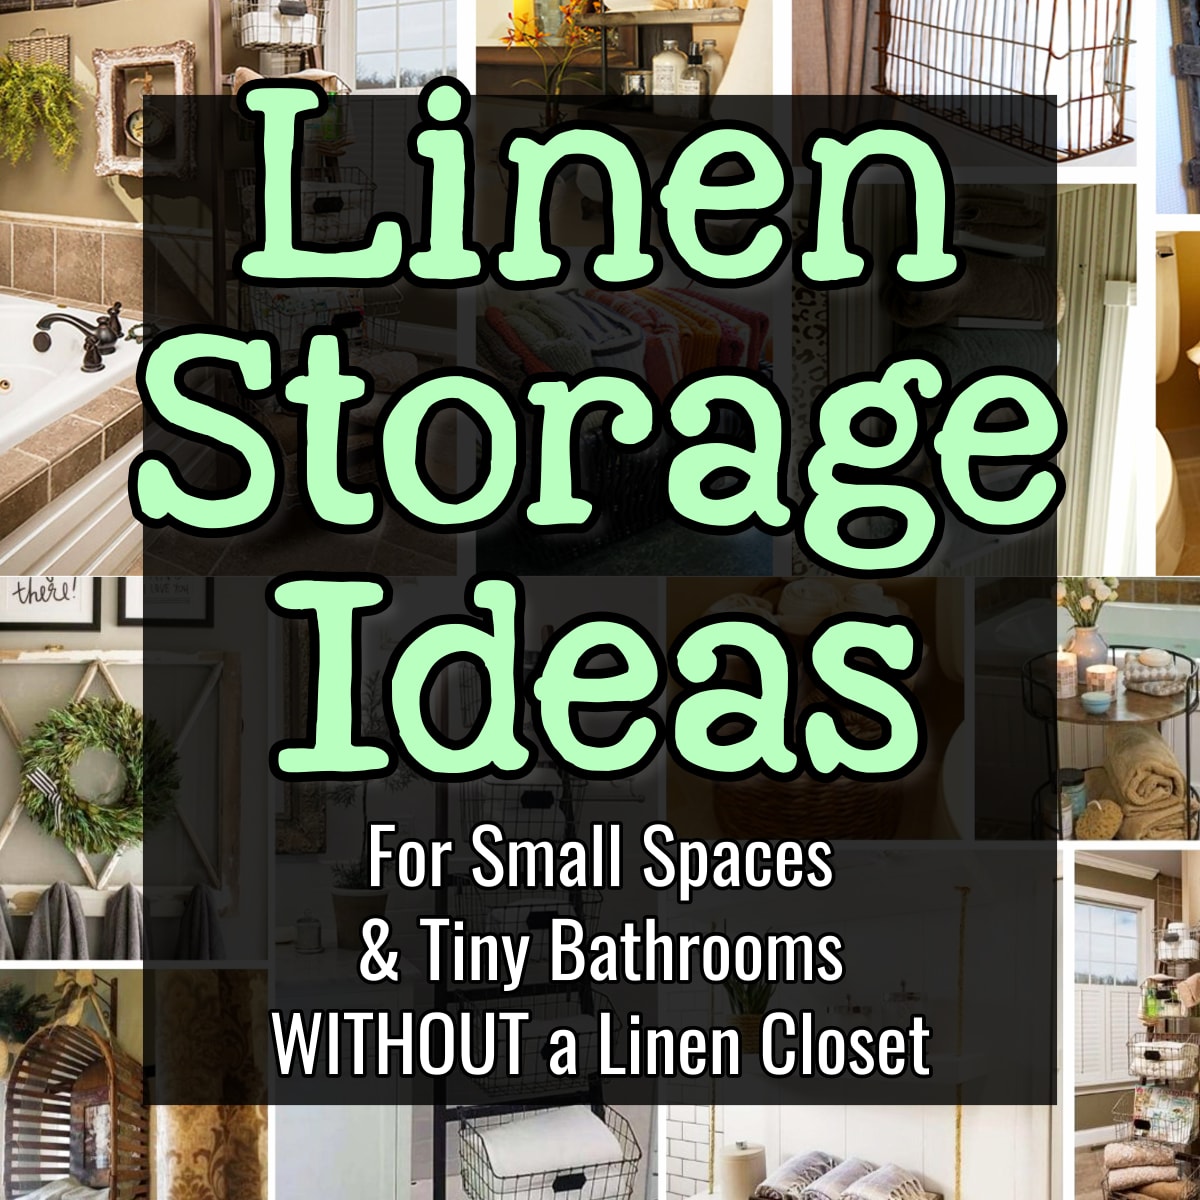 Linen Storage Ideas for Small Spaces, Tiny Bathrooms and a House WITHOUT a linen closet. No linen closet solutions and alternatives for storing towels, bed sheets, bath towels, blankets, comforters and bedding